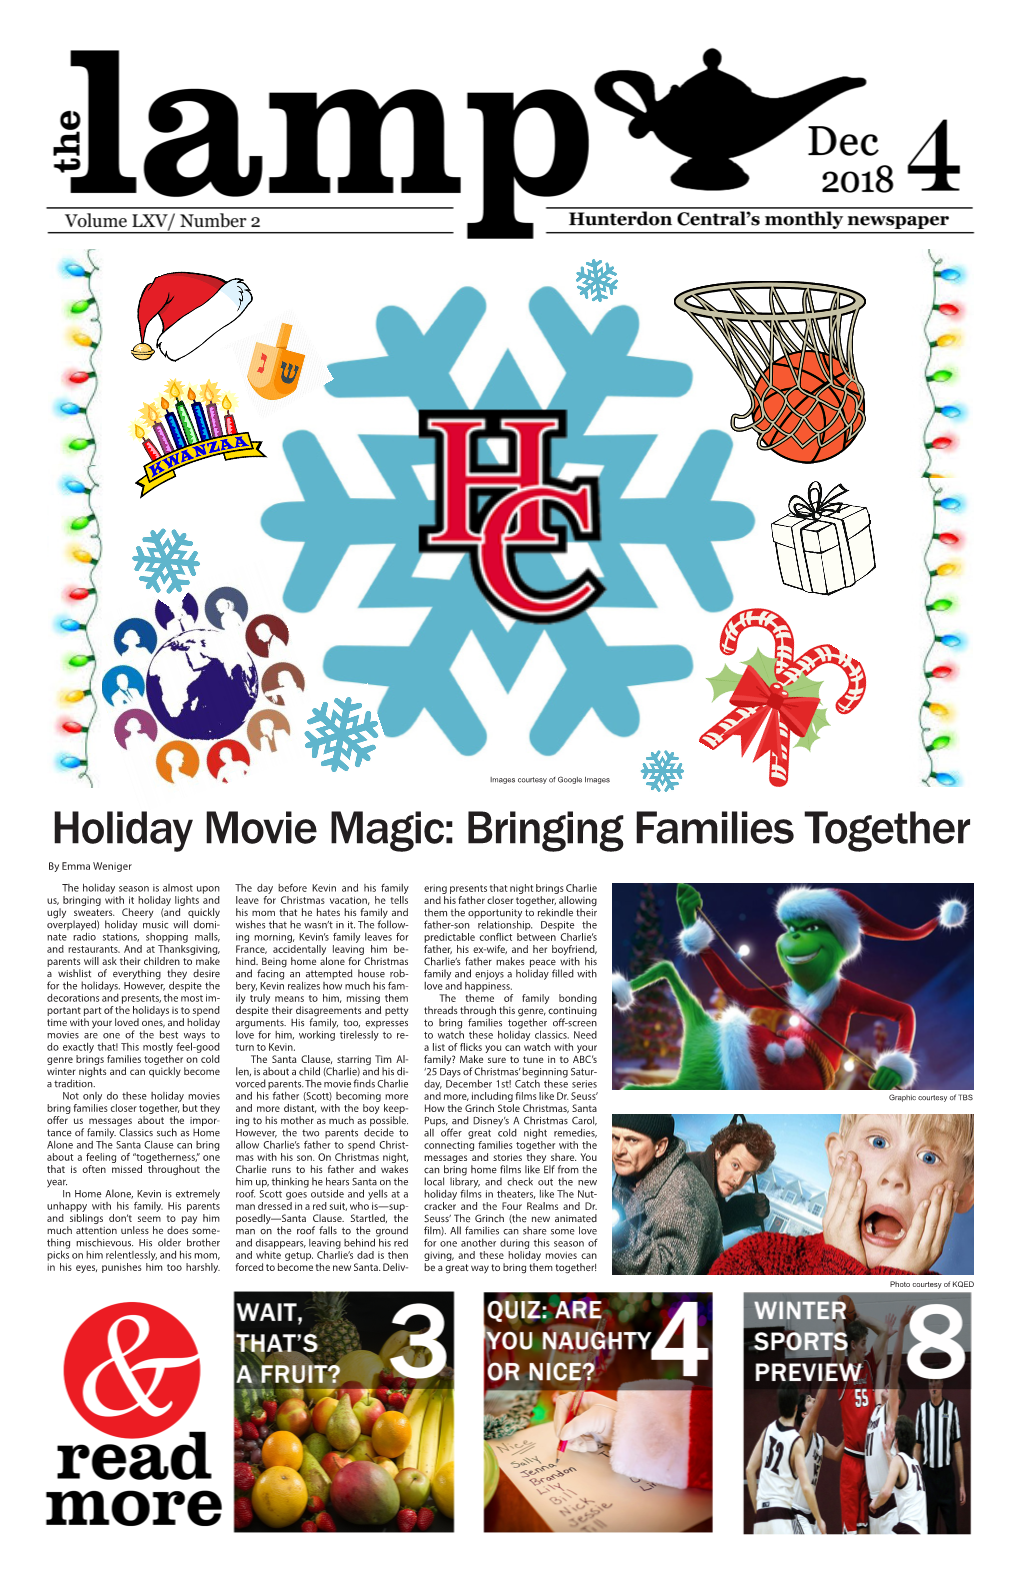 Holiday Movie Magic: Bringing Families Together by Emma Weniger